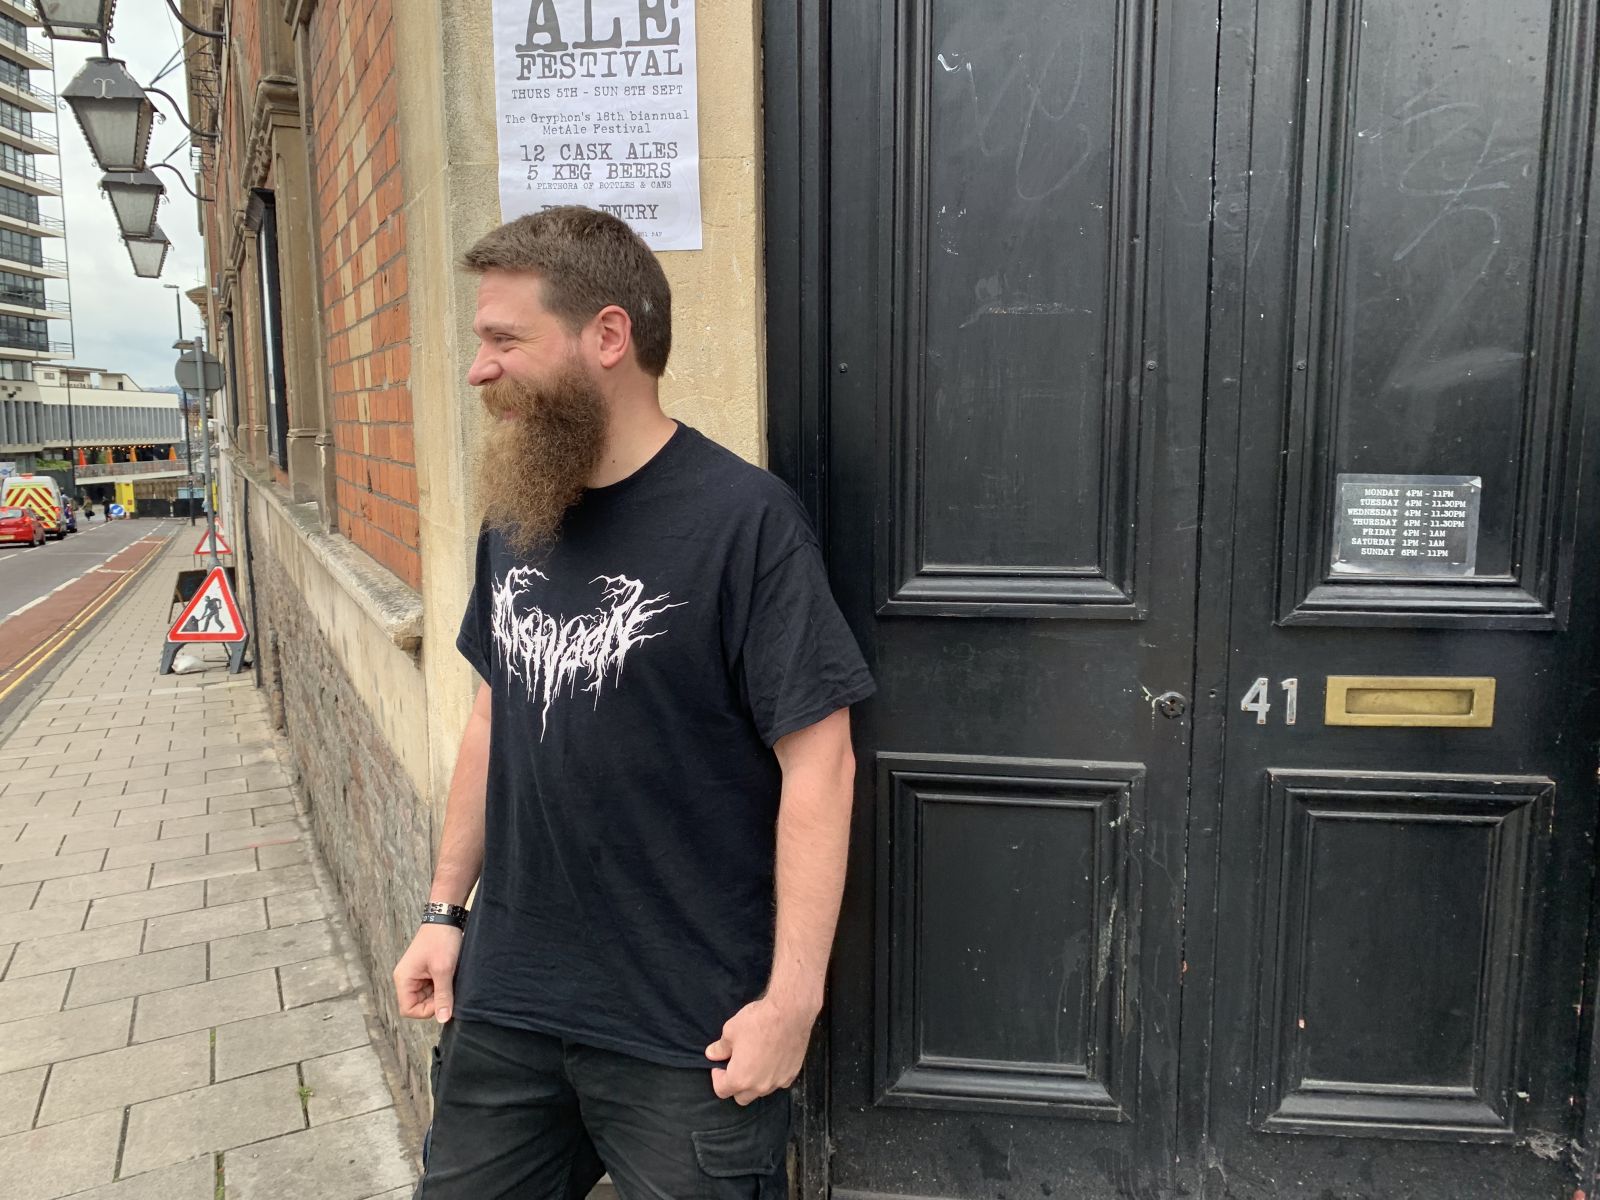 The Gryphon’s owner, John Ashby, outside the venue